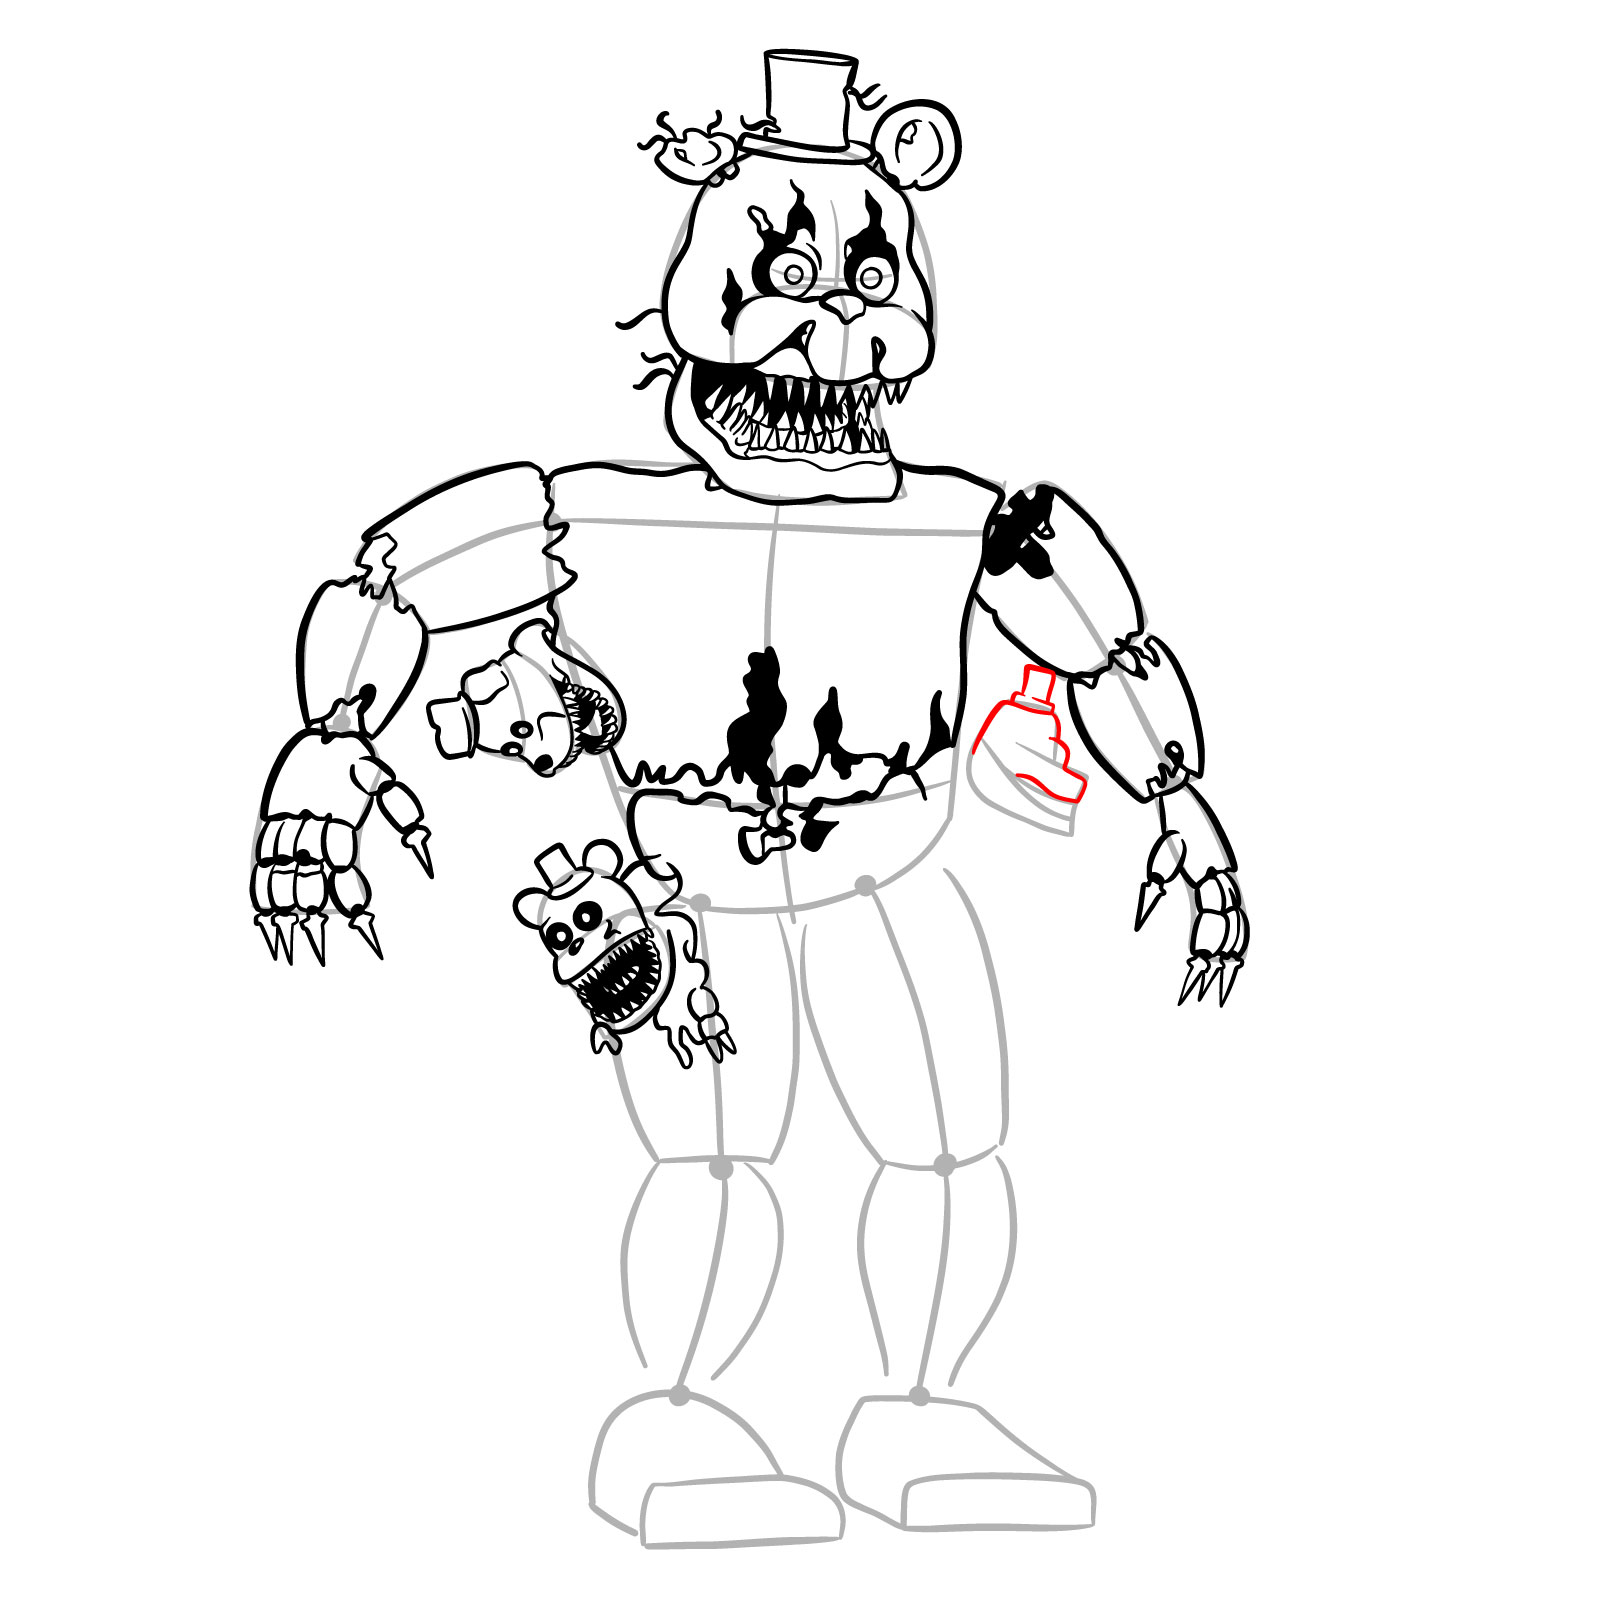 How to draw Nightmare Freddy - step 36